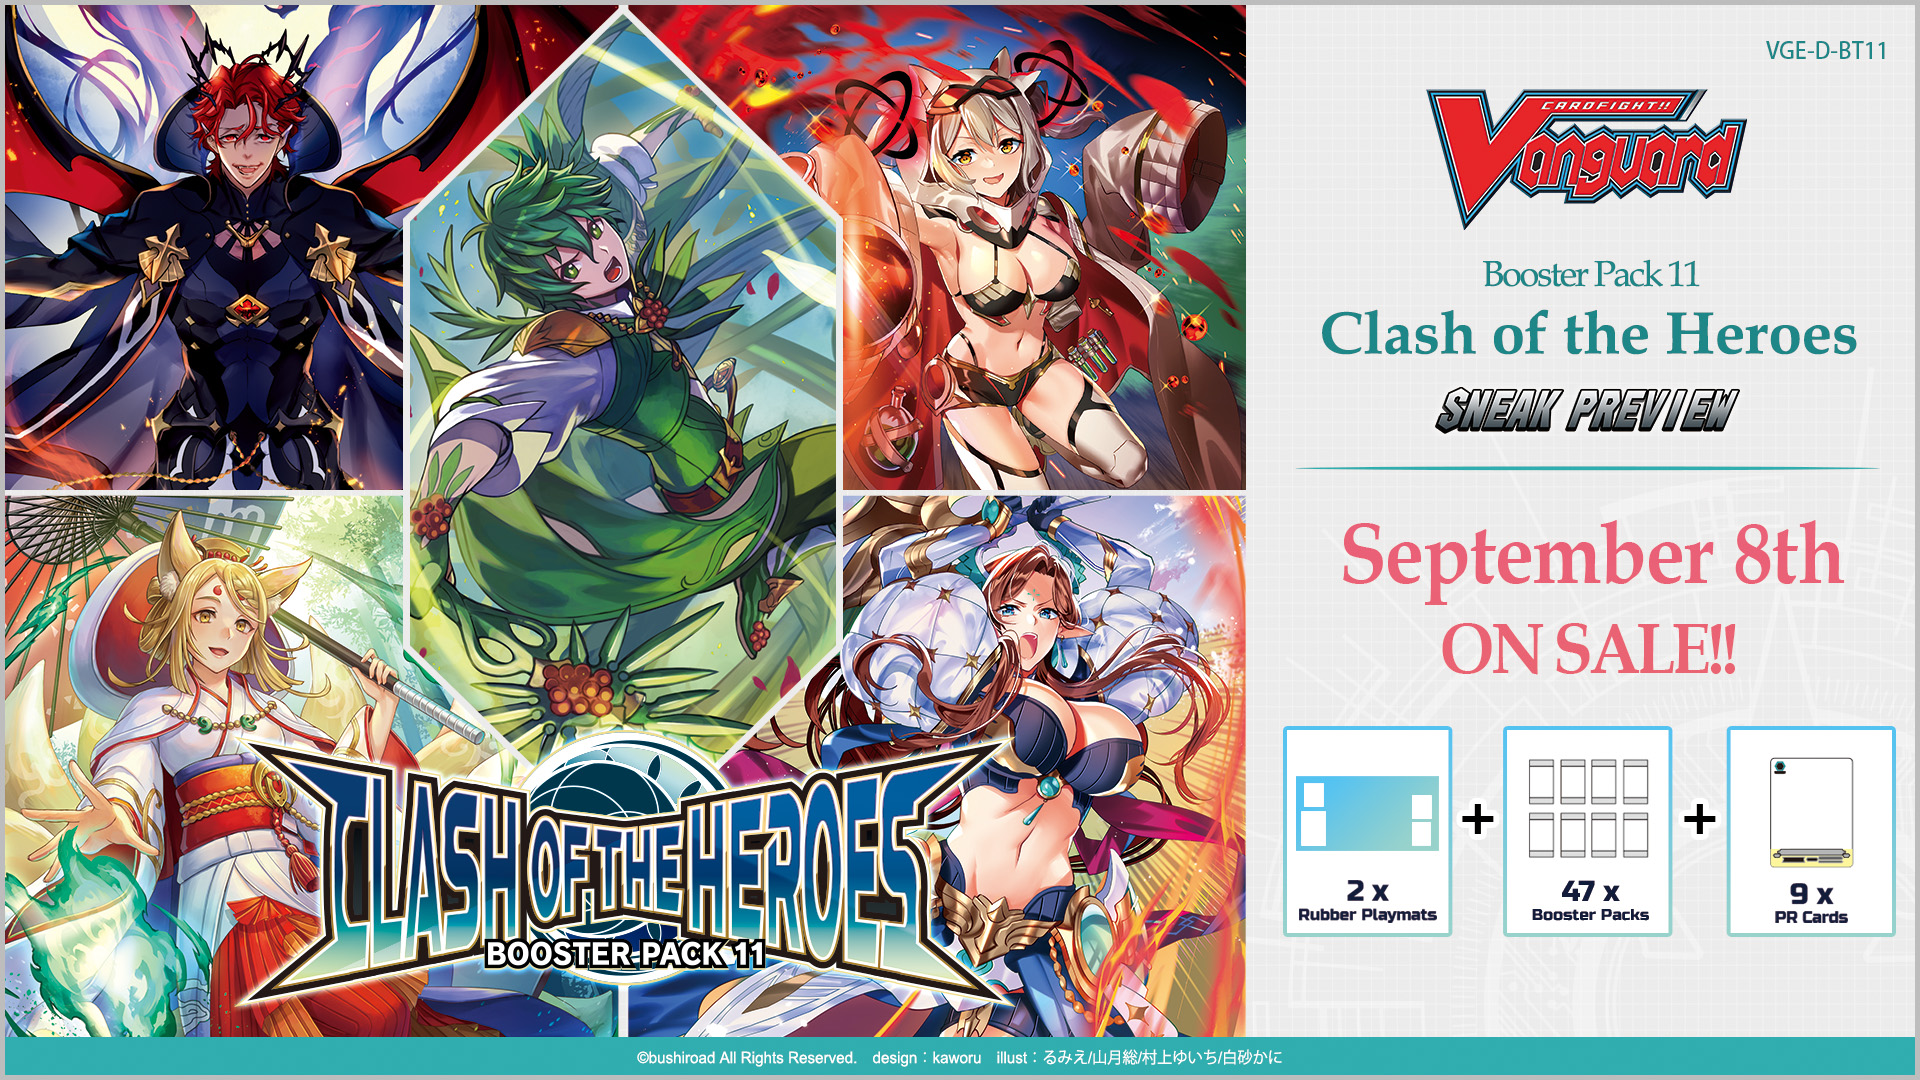 Cardfight!! Vanguard Booster Pack 11: Clash of the Heroes Sneak Preview